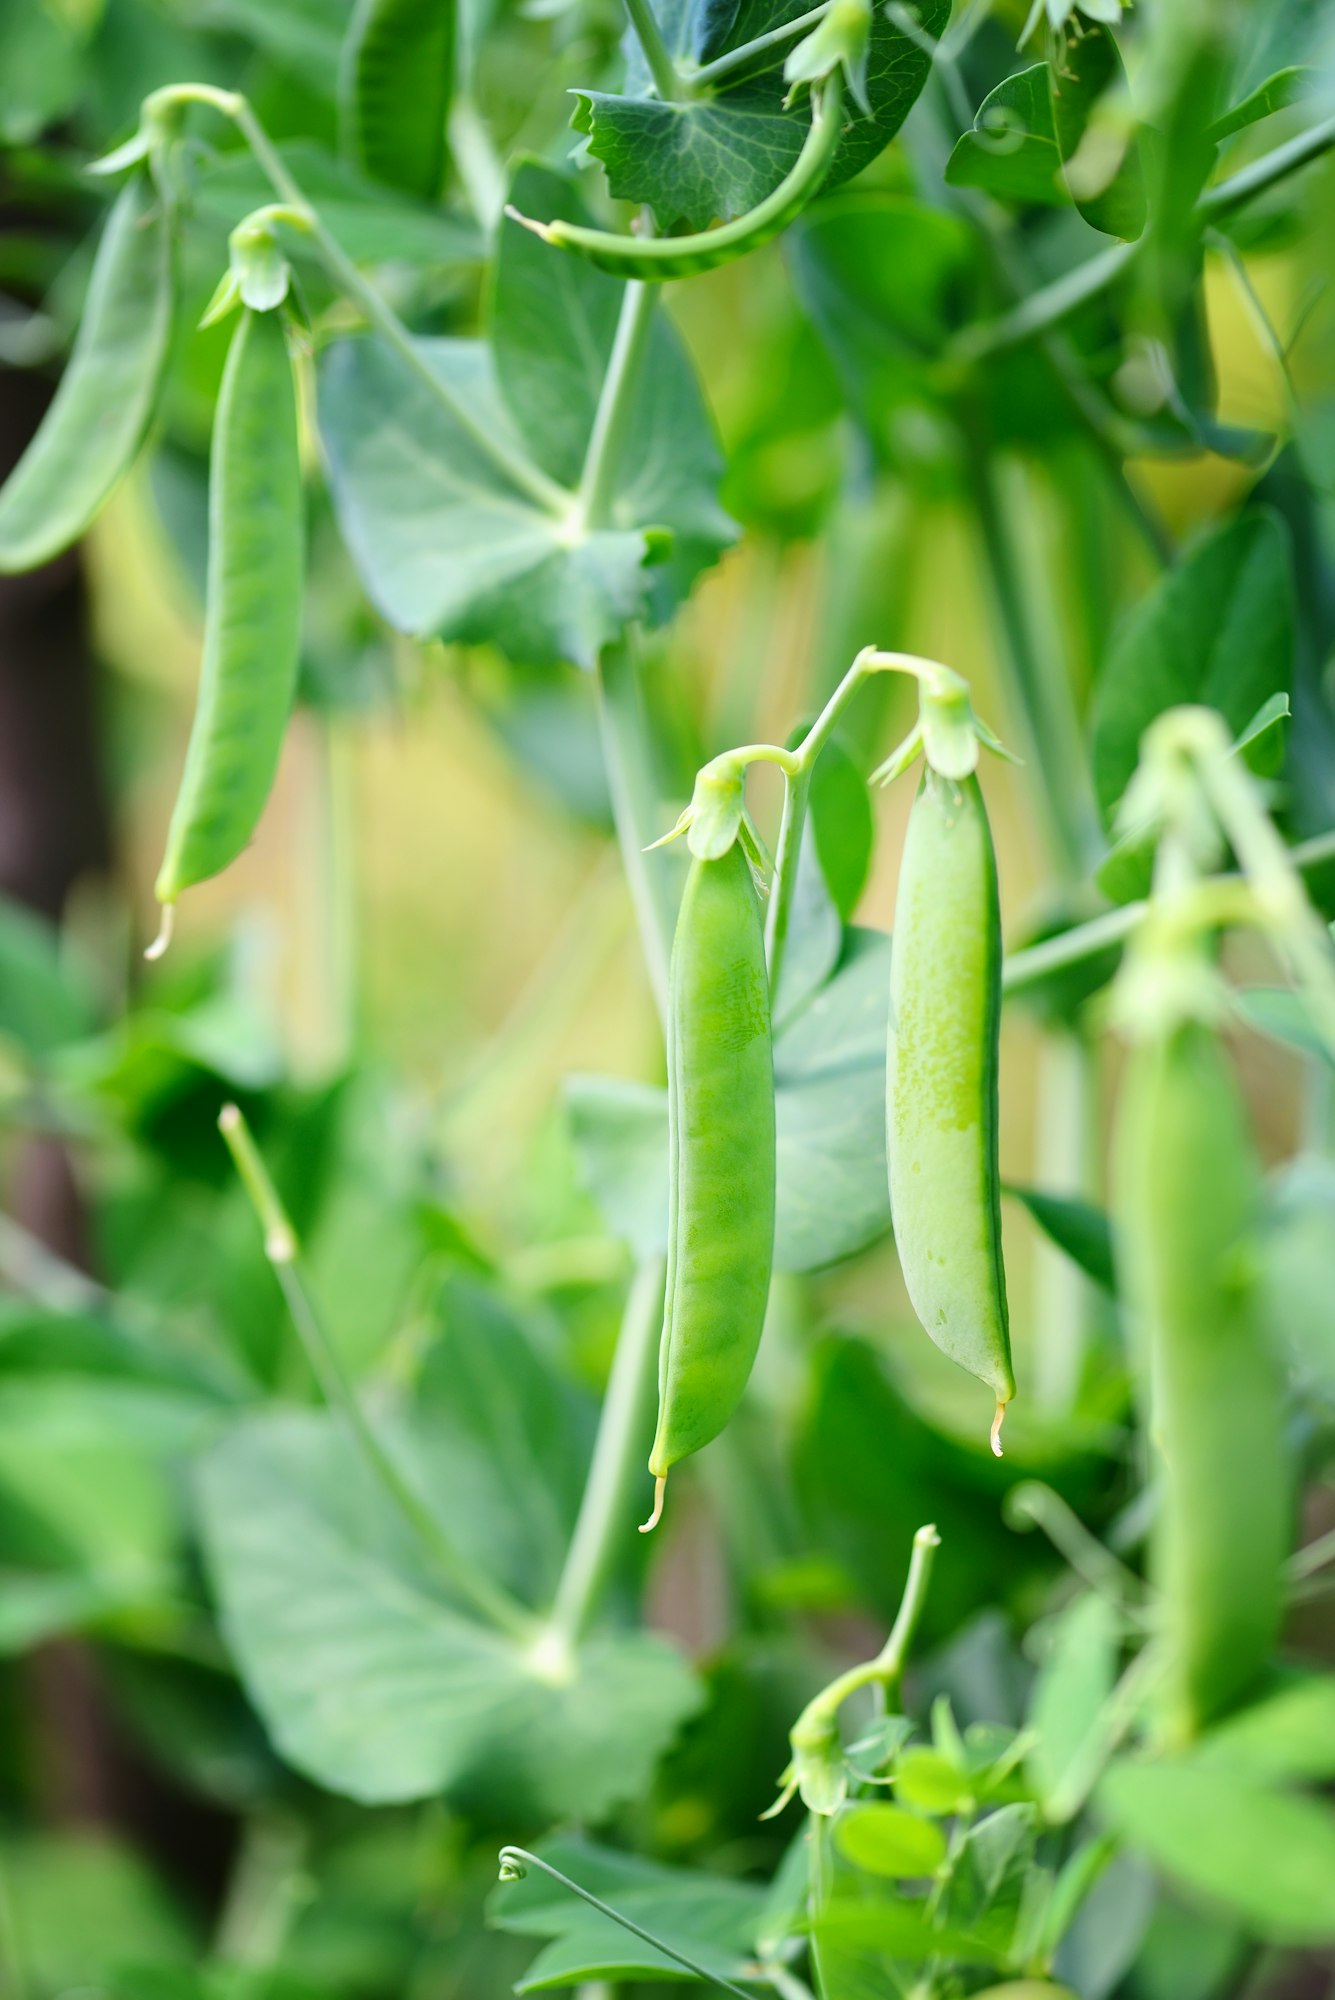 Caring for Your Bean Plants